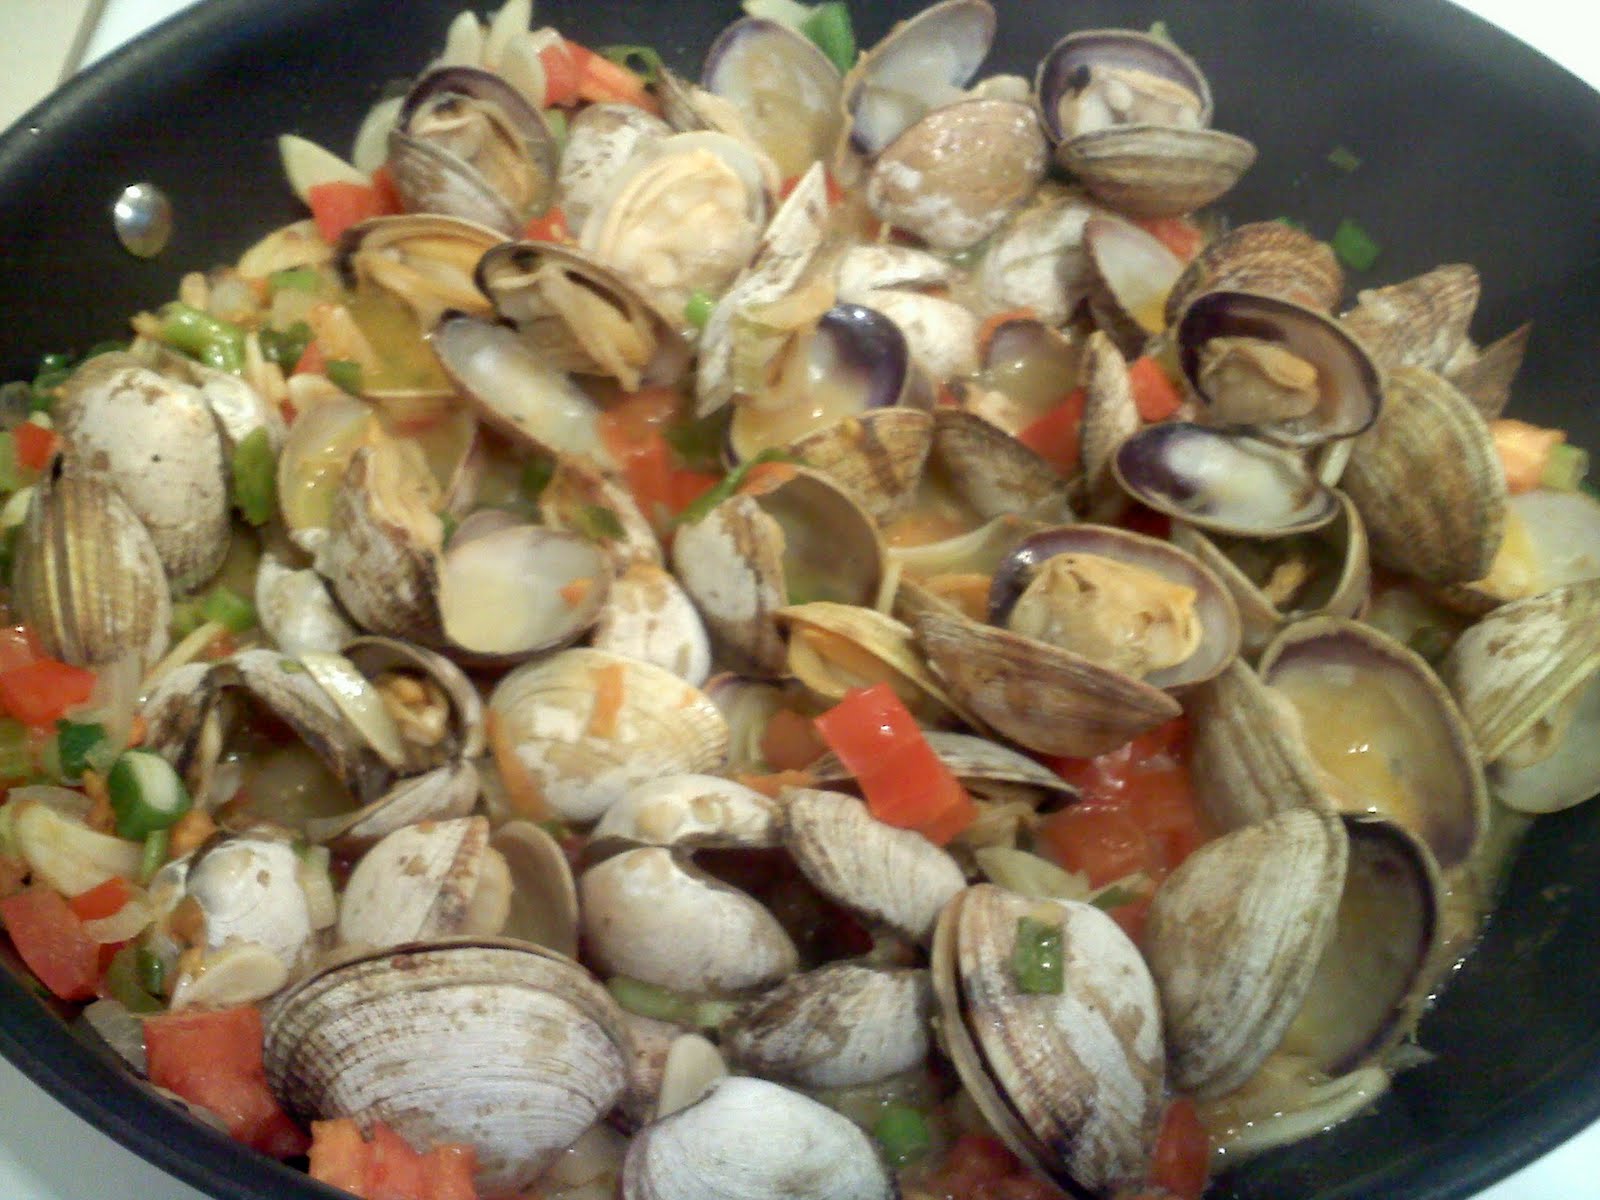 Finding My Inner Chef: Clams, clams, clams!